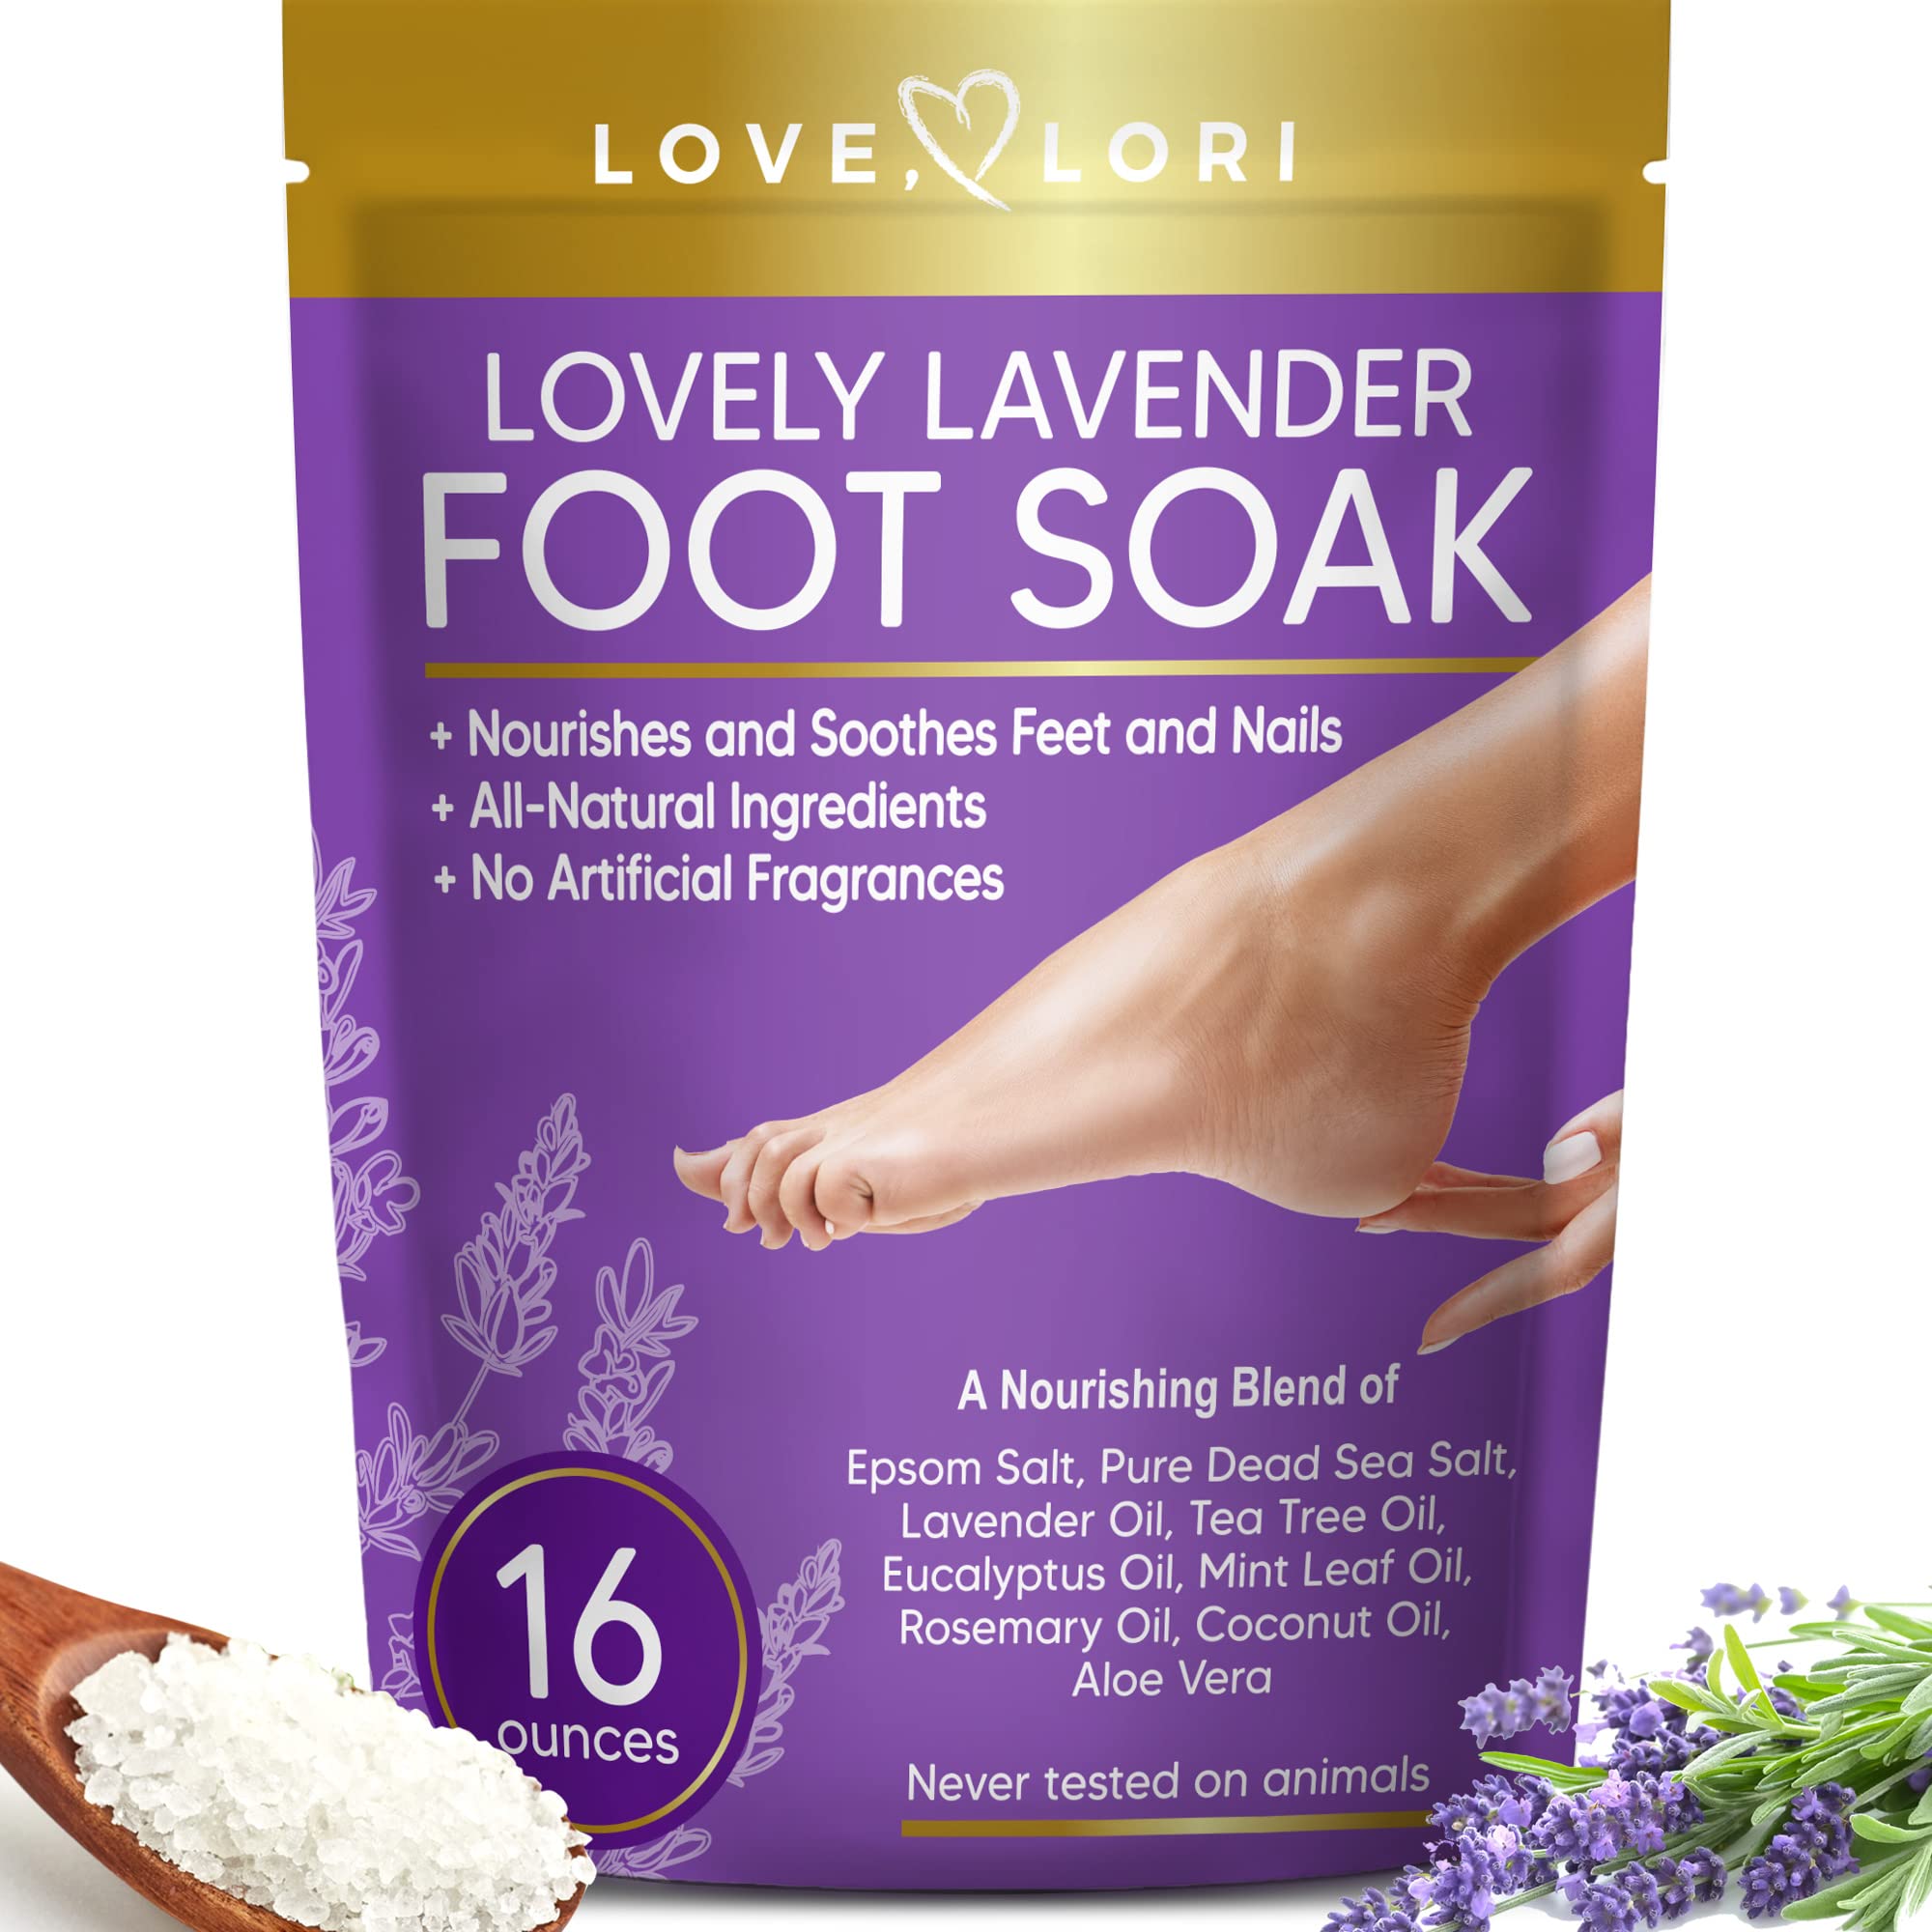 Lavender Foot Soak (16oz) Body Detox Foot Soak for Dry Cracked Feet - w/  Lavender Oil, Tea Tree Oil & Epsom Salt, Soothes Tired Achy Feet - Pedicure  Supplies for Foot Spa